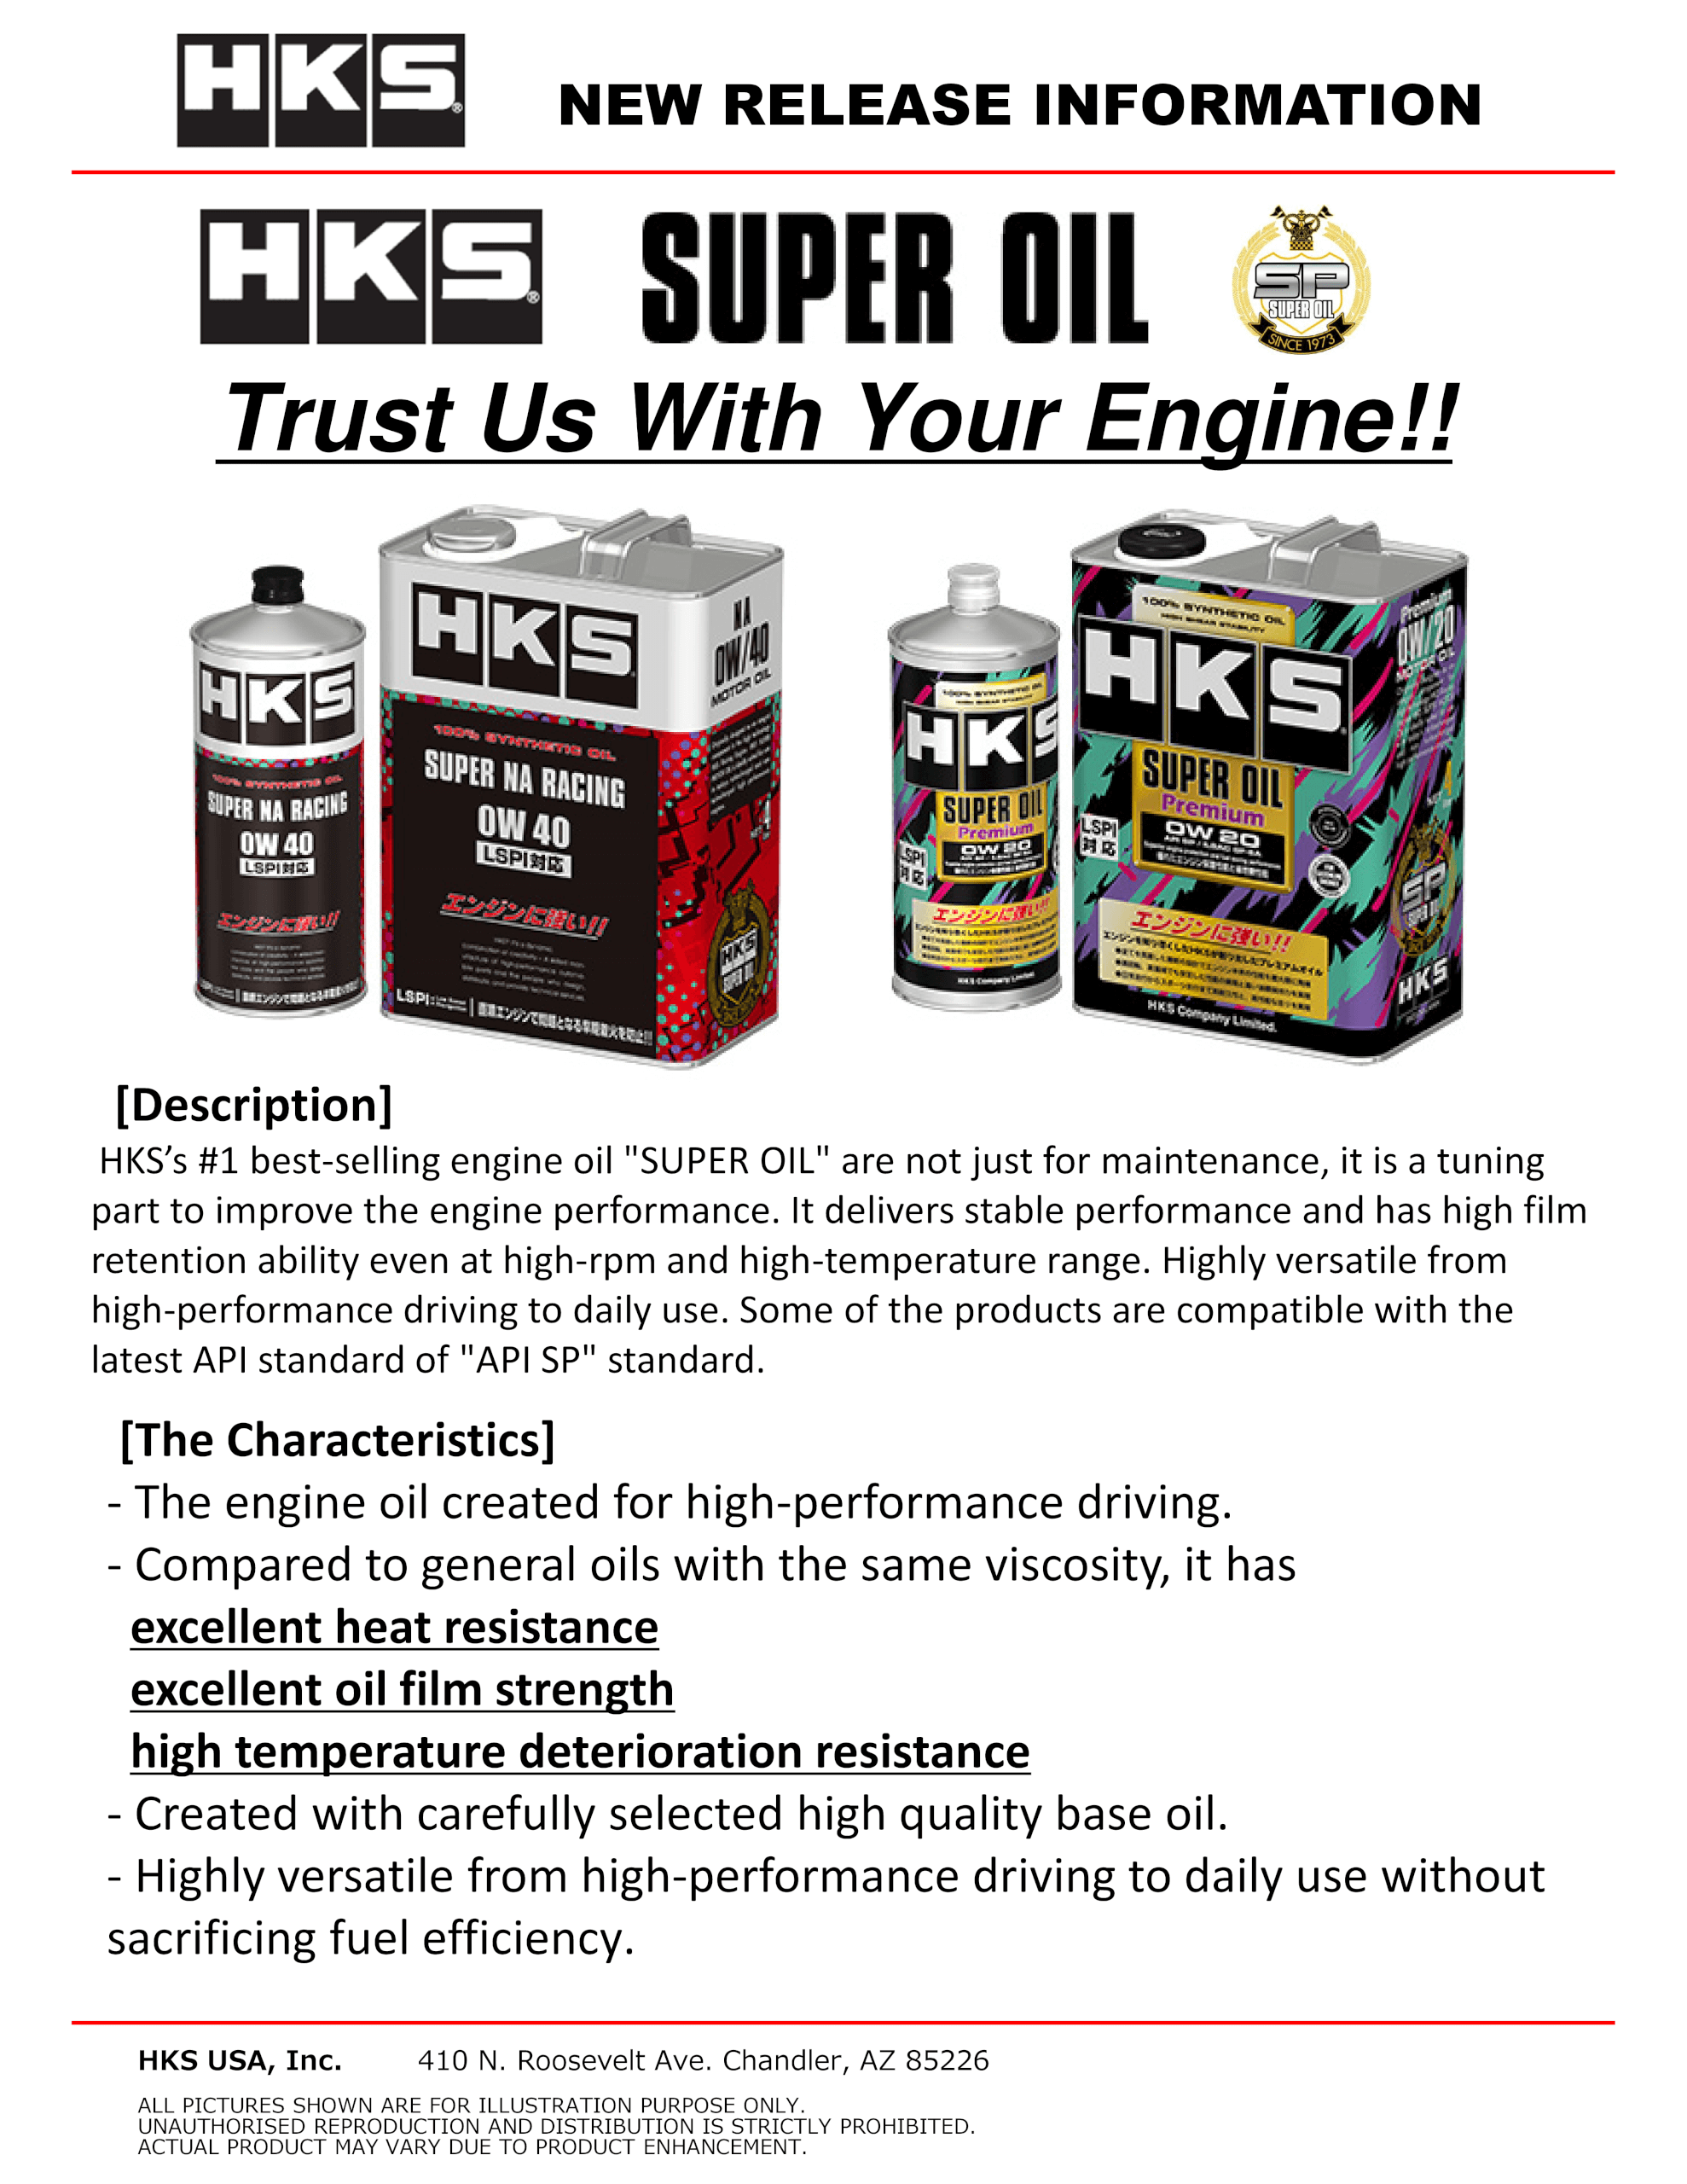 New Product Info_HKS SUPER OIL Series_01.png